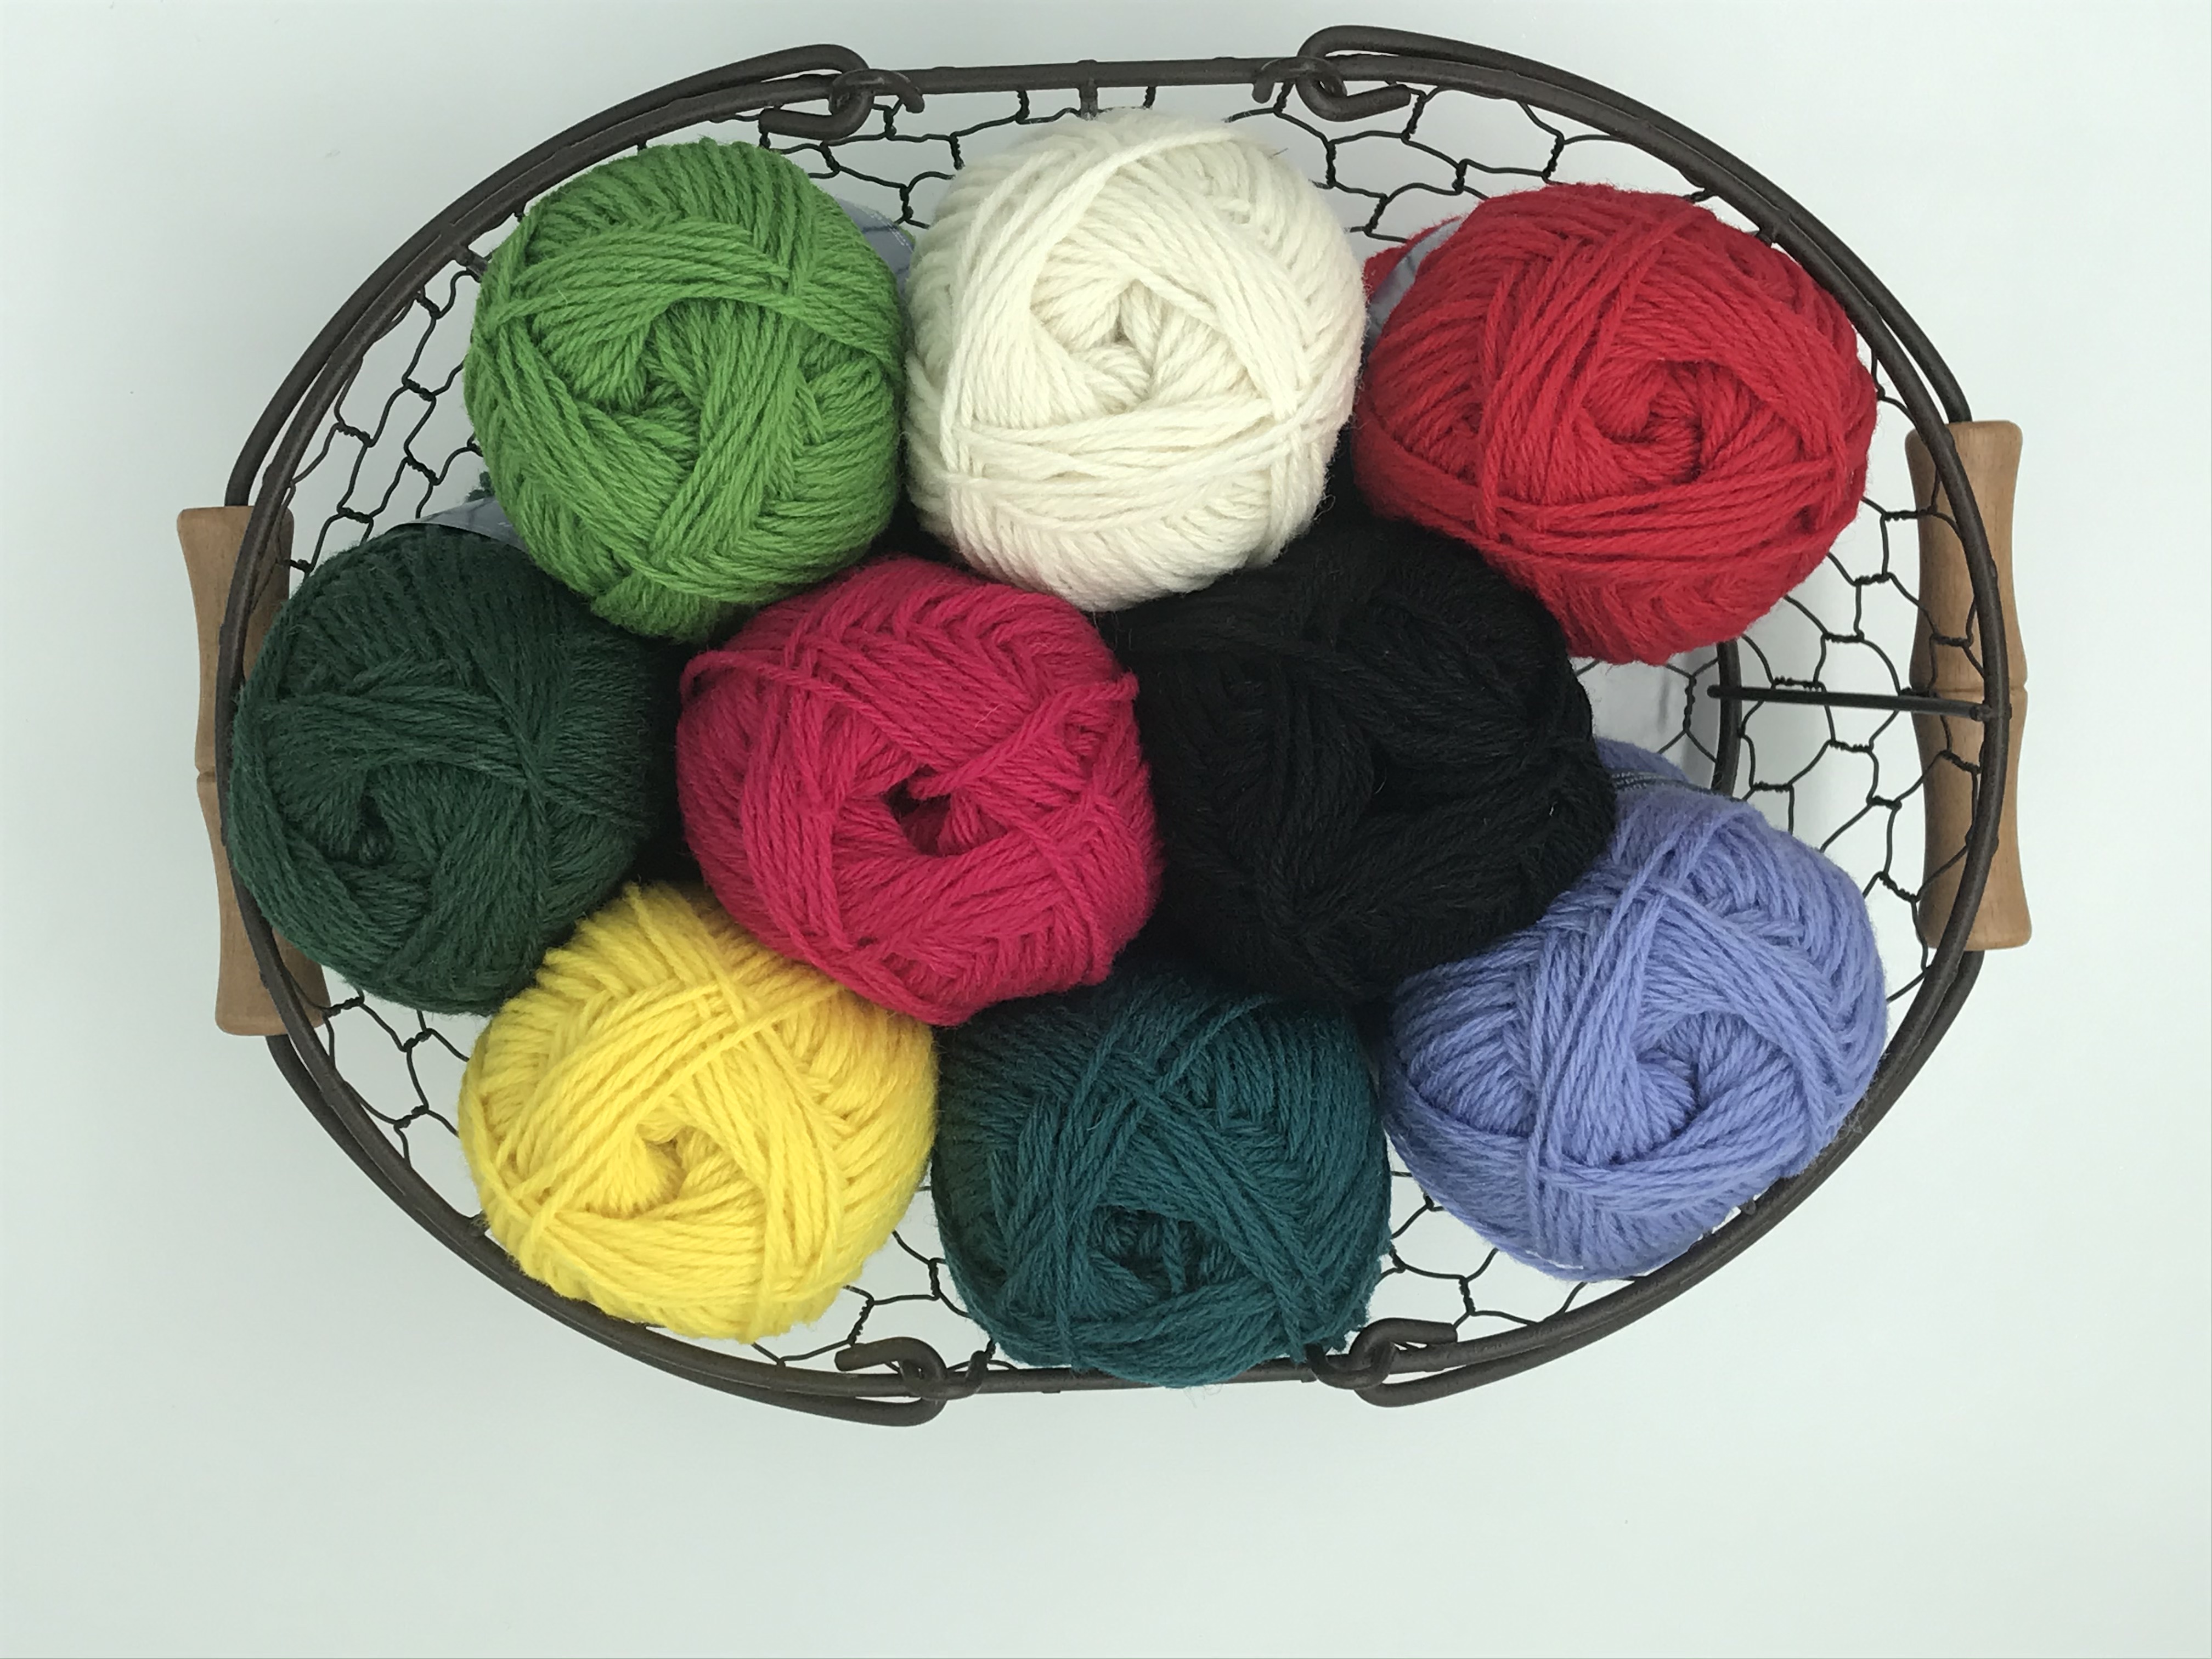 Not All Wool Knitting Yarn is Created Equal ... Why?